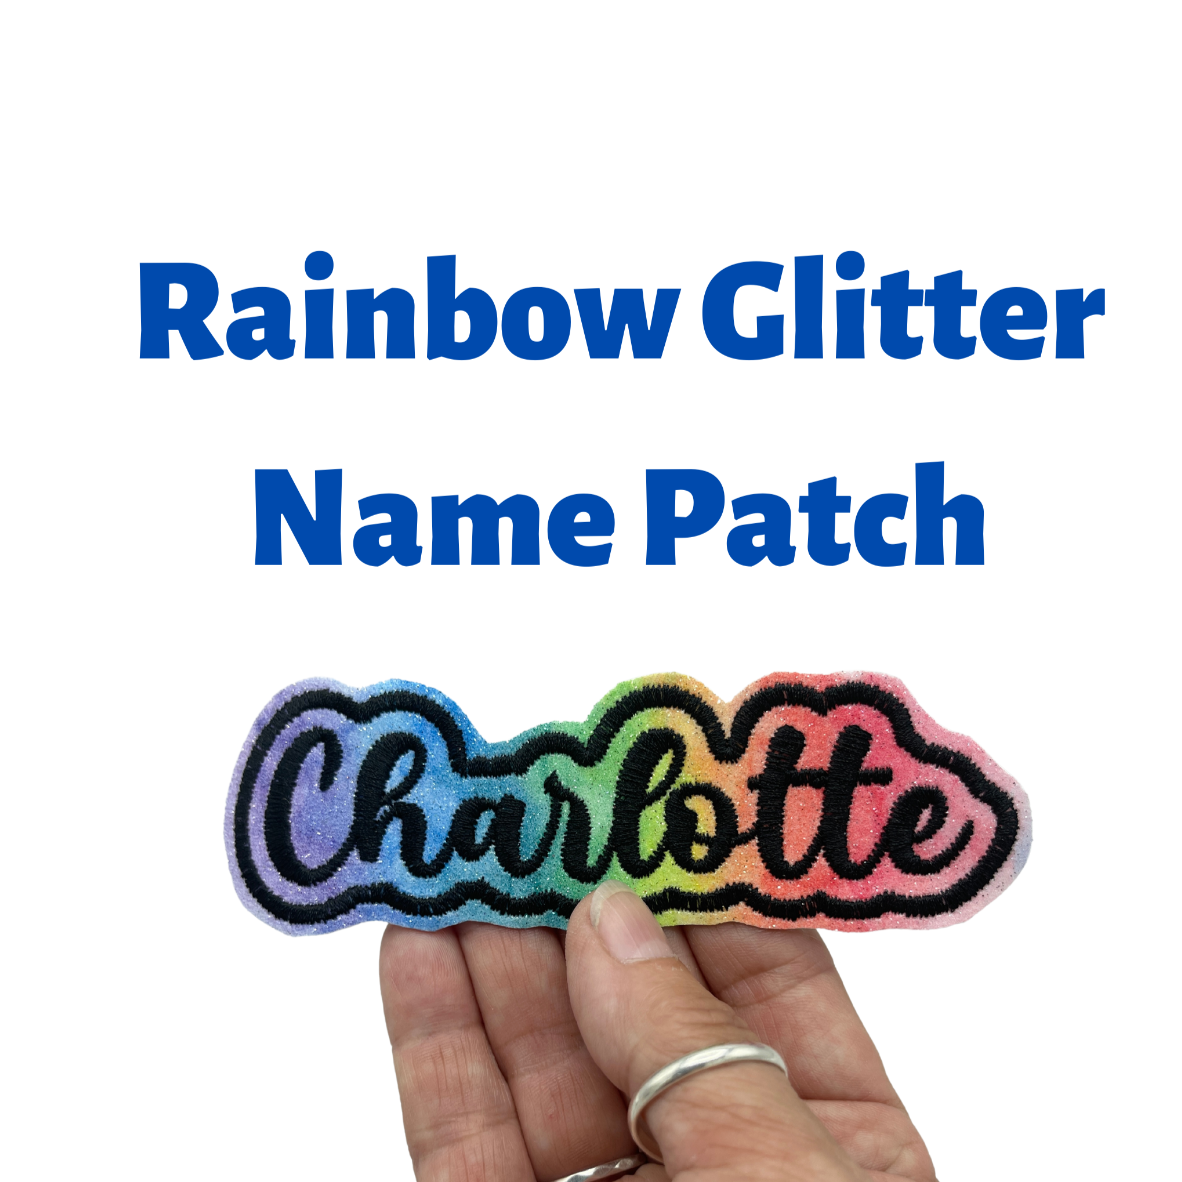 Embroidered Rainbow Glitter Name Patch – Cee Bee Stitches